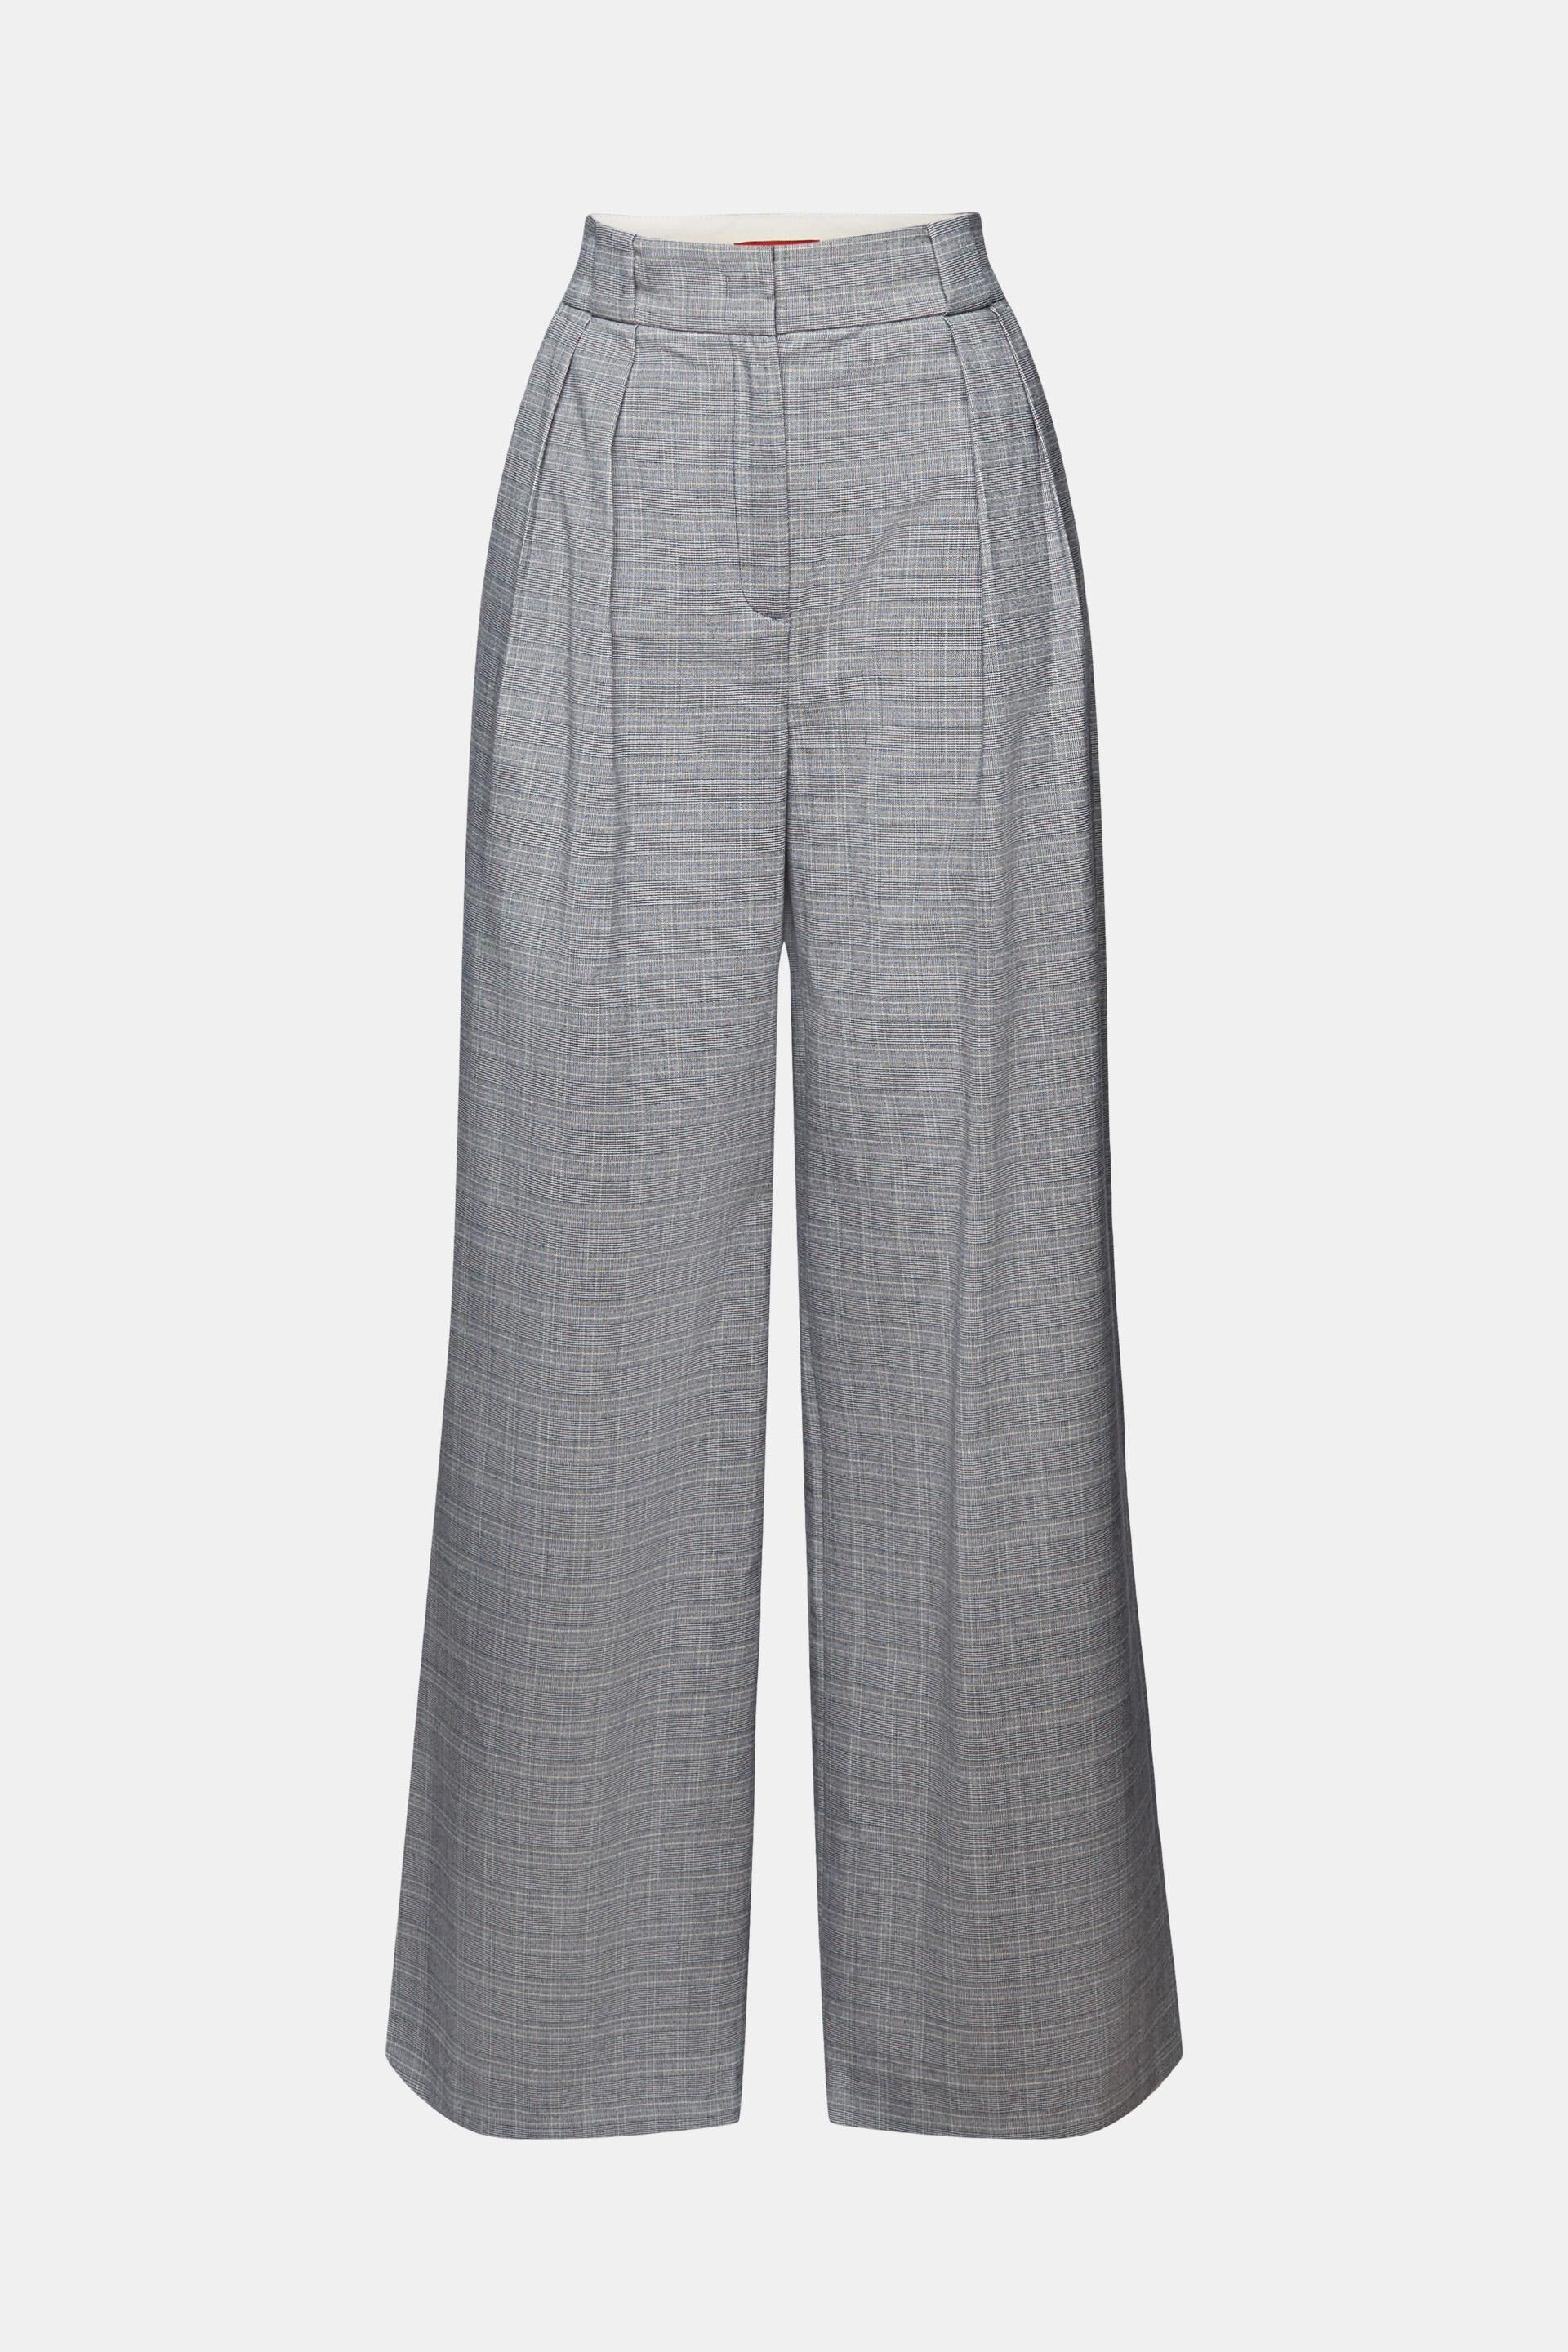 Clarina Trousers in Black And White Prince Of Wales Check | Emilia Wickstead